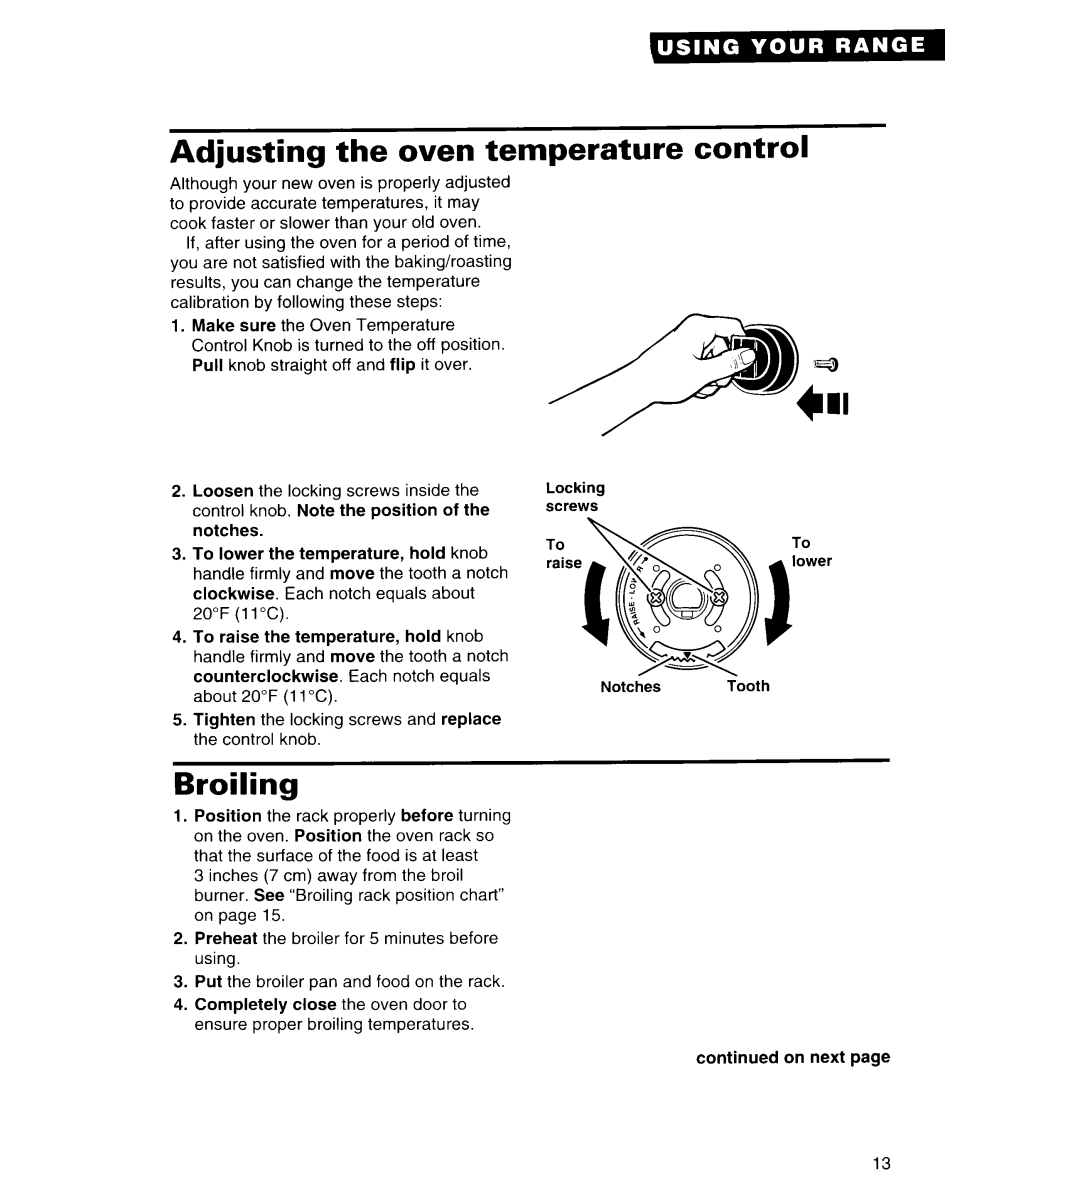 Whirlpool FGS385B important safety instructions Adjusting the oven temperature control, Broiling 